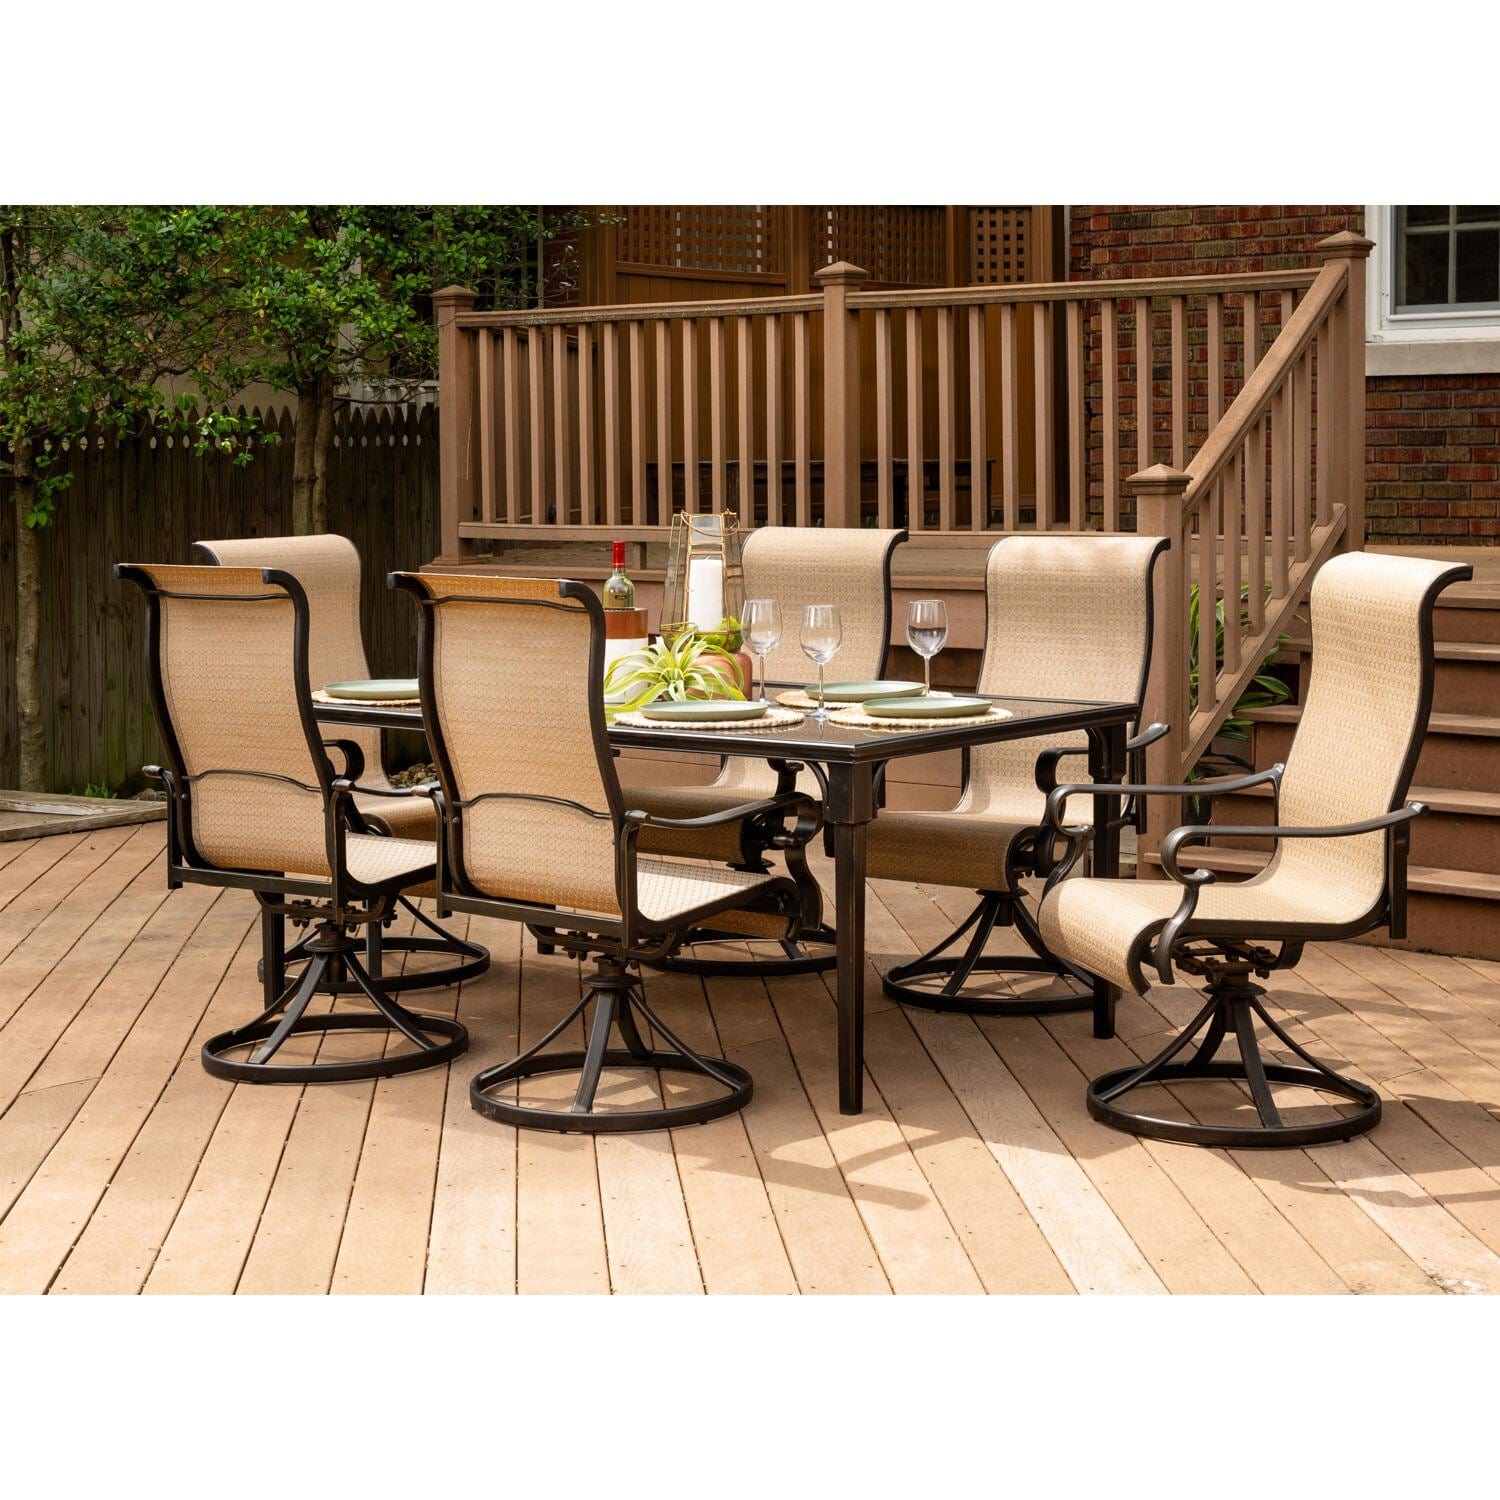 Hanover Outdoor Dining Set Hanover - Brigantine 7-Piece Dining Set with a 40" x 70" Glass-Top Dining Table and 6 Sling Swivel Rockers - BRIGDN7PCSWG-6